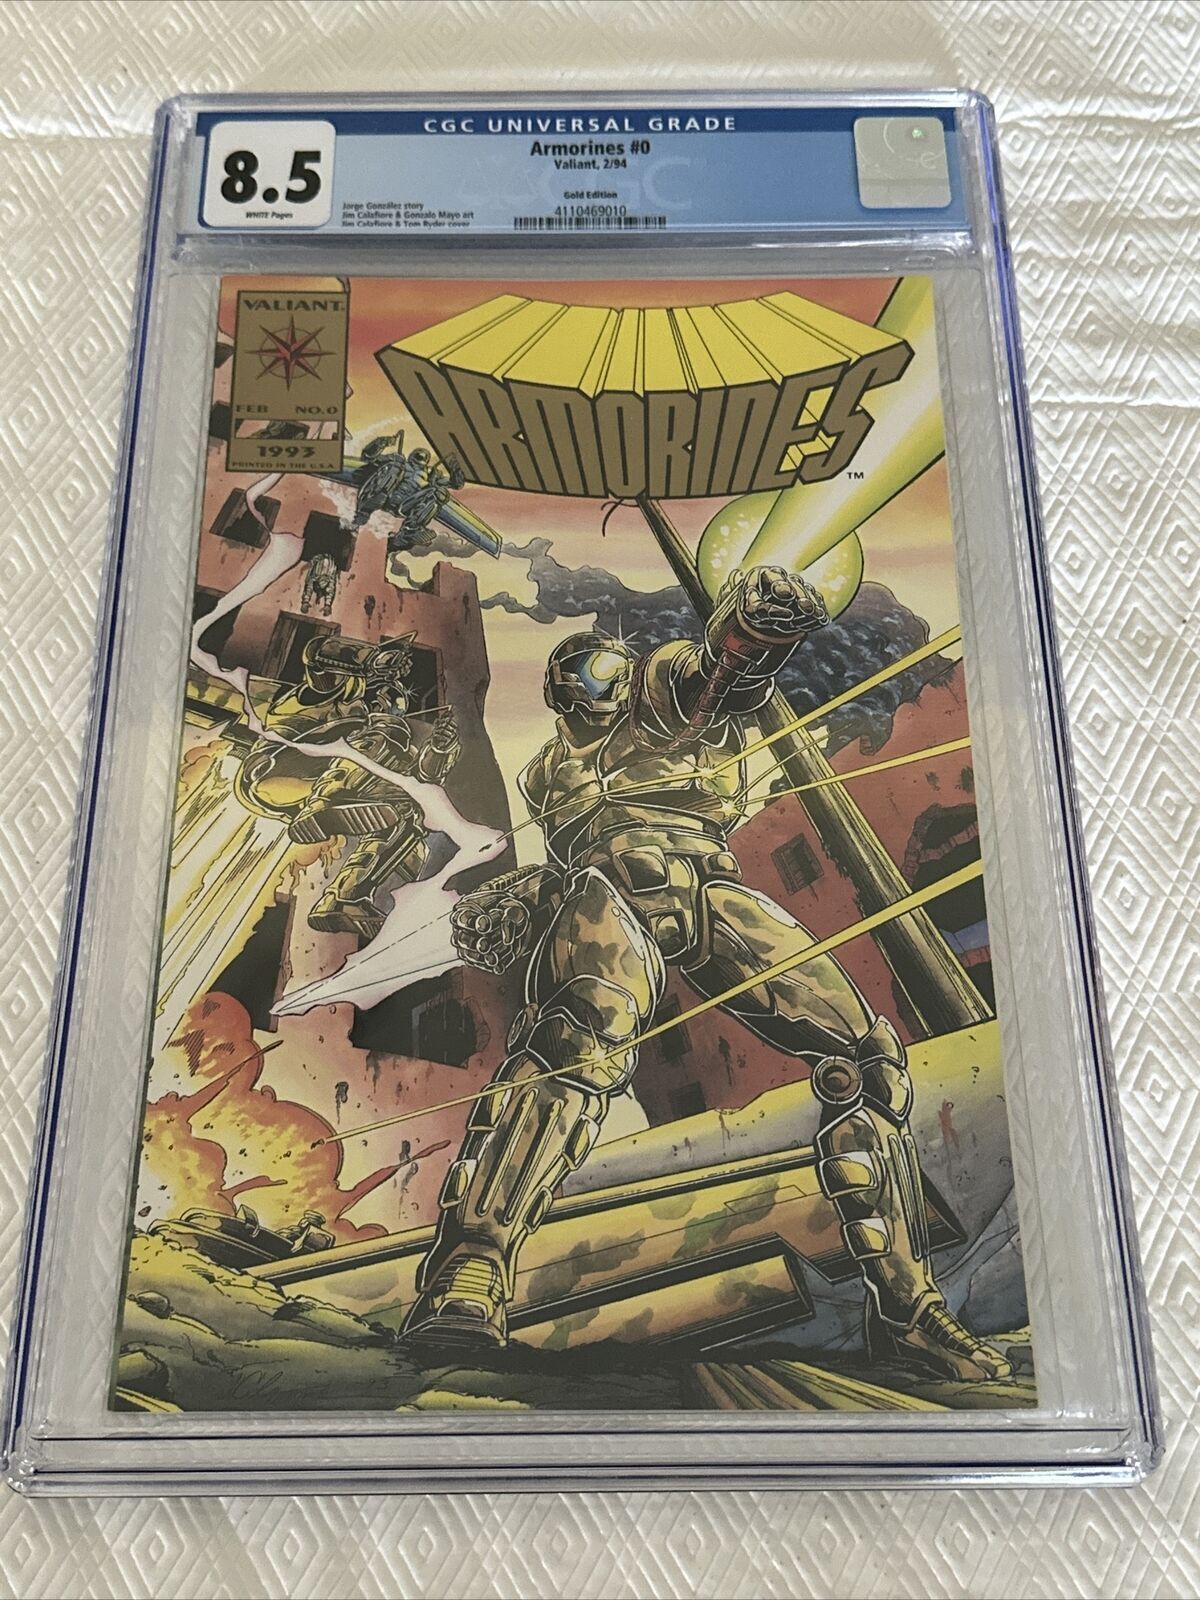  ARMORINES #0 Gold Edition 1994 Valiant Comics White Pages CGC 8.5